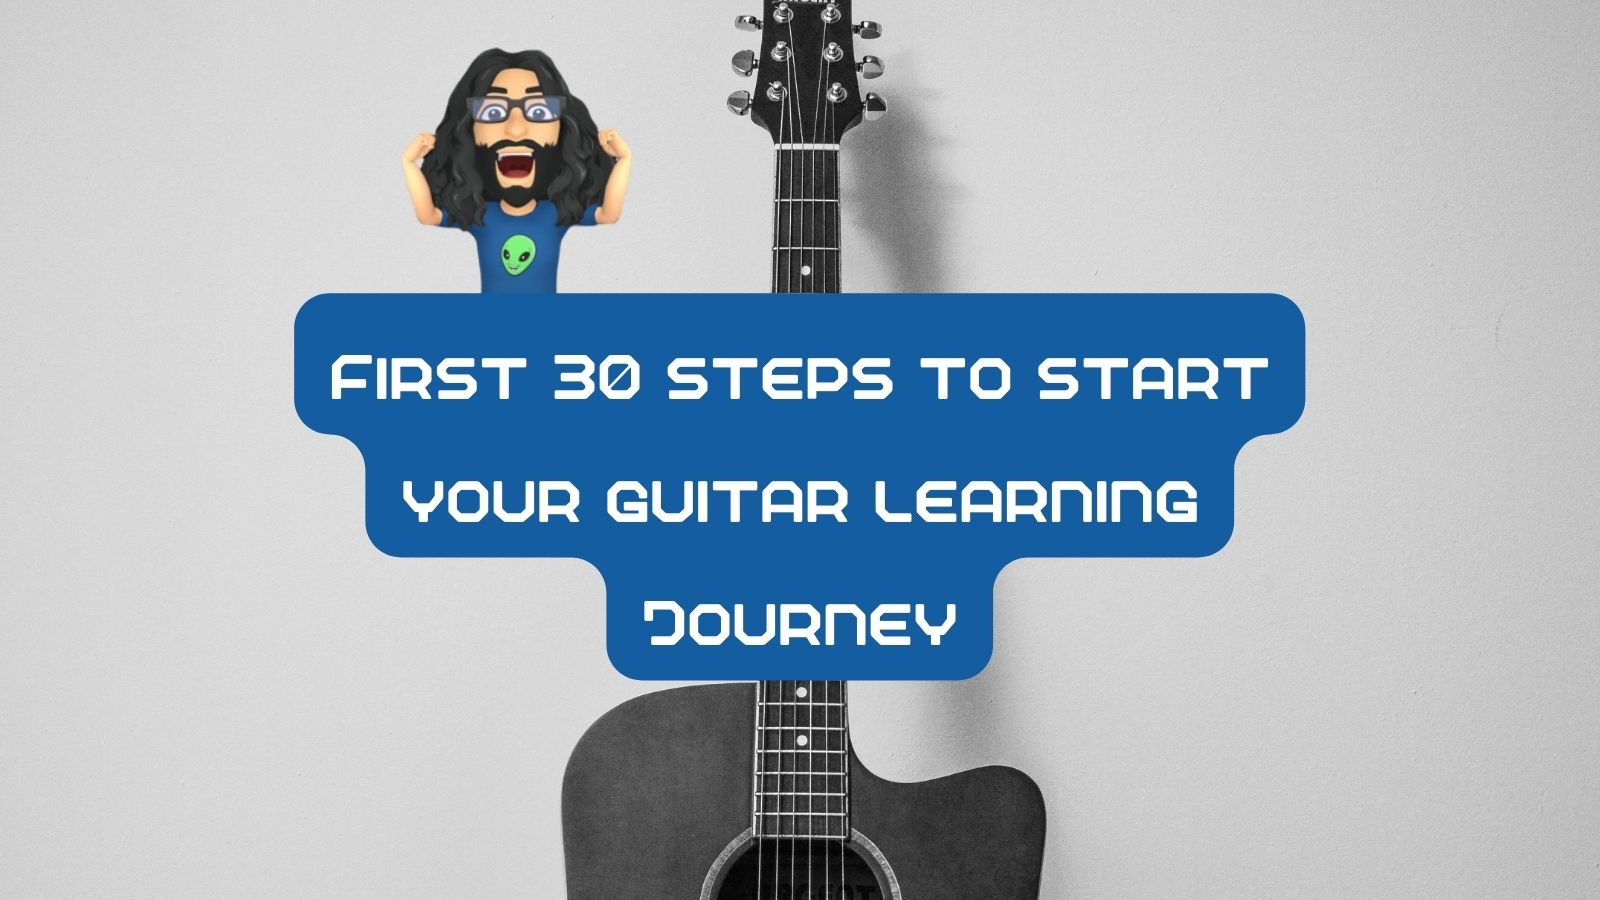 First 30 steps to start your guitar learning journey